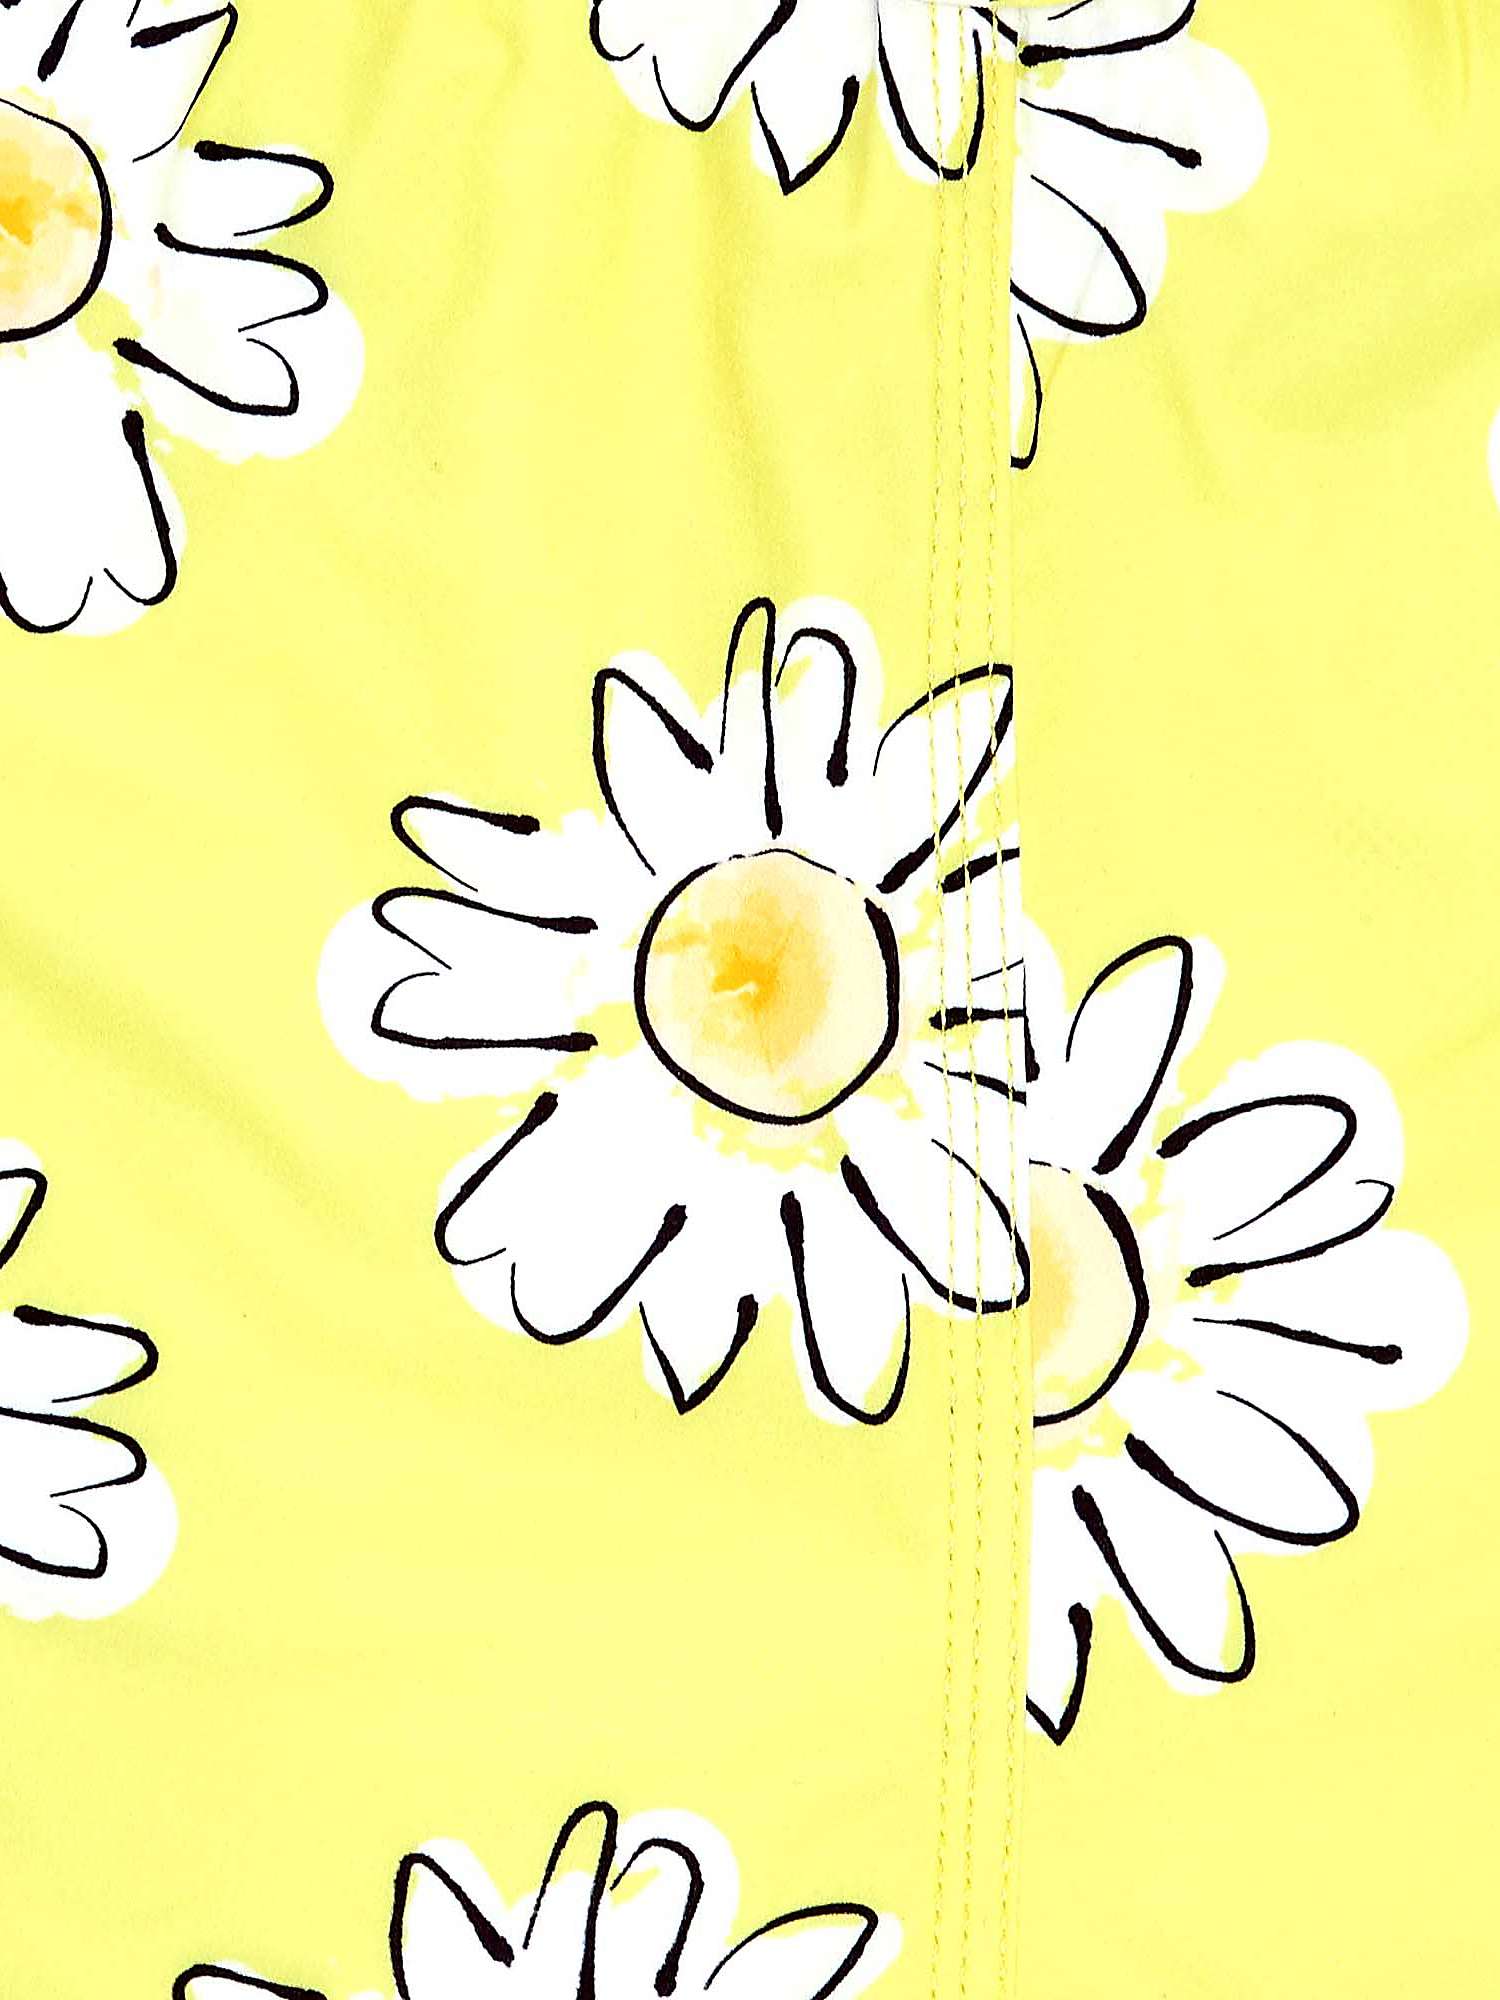 Buy Randy Cow Daisy Print Swim Shorts with Waterproof Pocket, Yellow Online at johnlewis.com